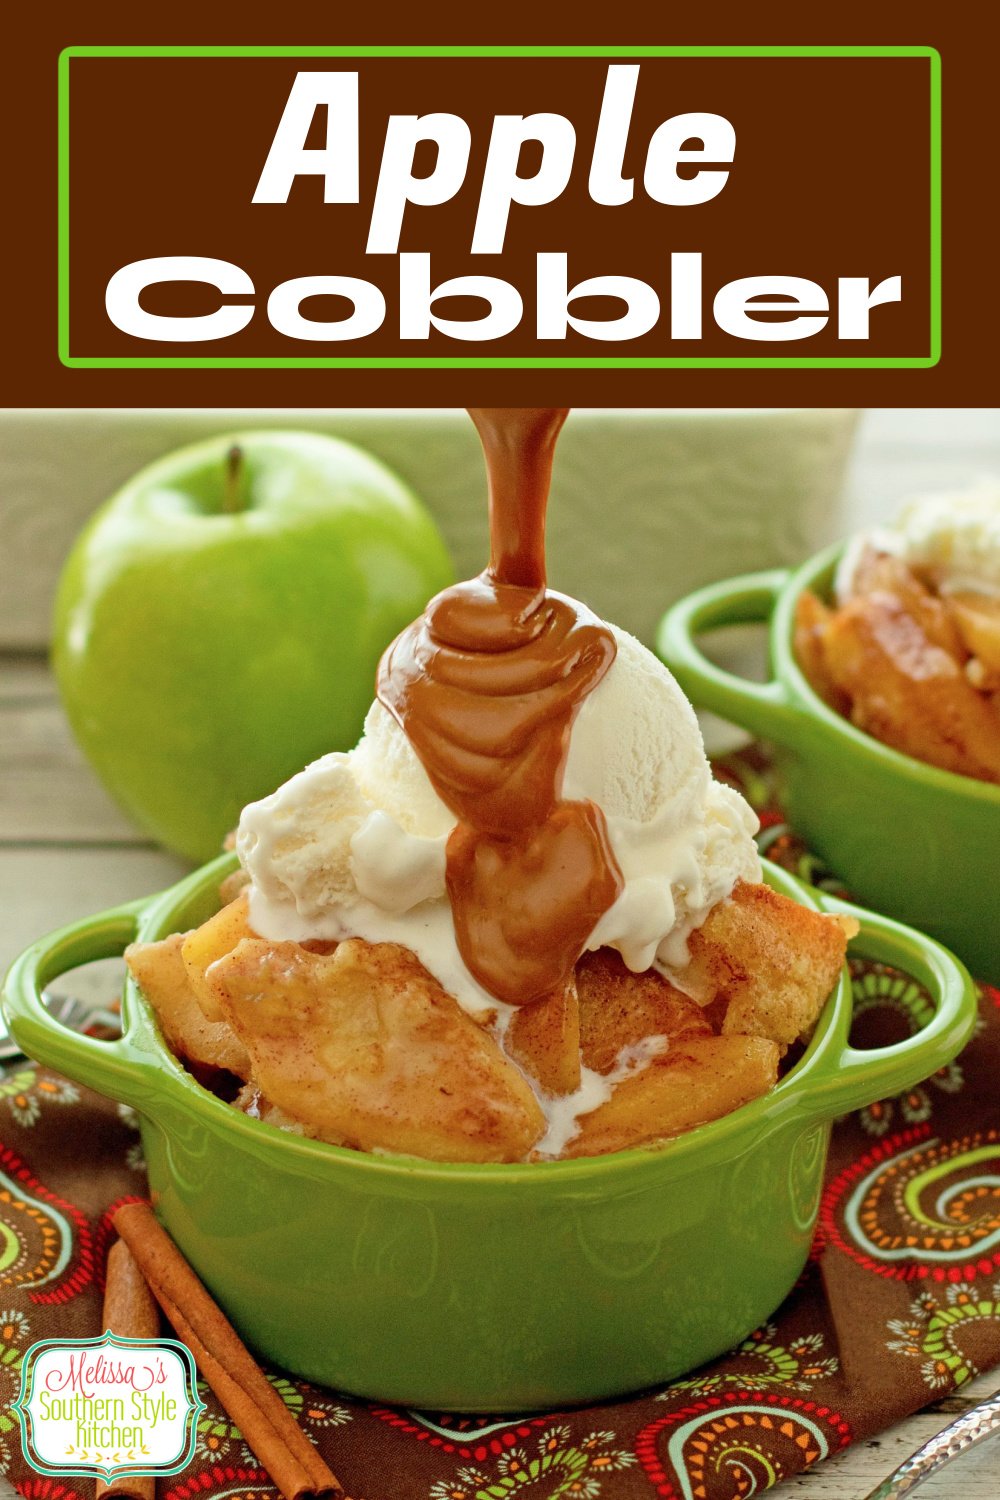 This Apple Cobbler recipe features a homemade cinnamon apple filling and buttery batter that's baked until it's puffed and golden. #applerecipes #applecobbler #easycobblerrecipes #appledesserts #easyapplecobbler #cobbler #fallbaking #thanksgivingdesserts #apples via @melissasssk